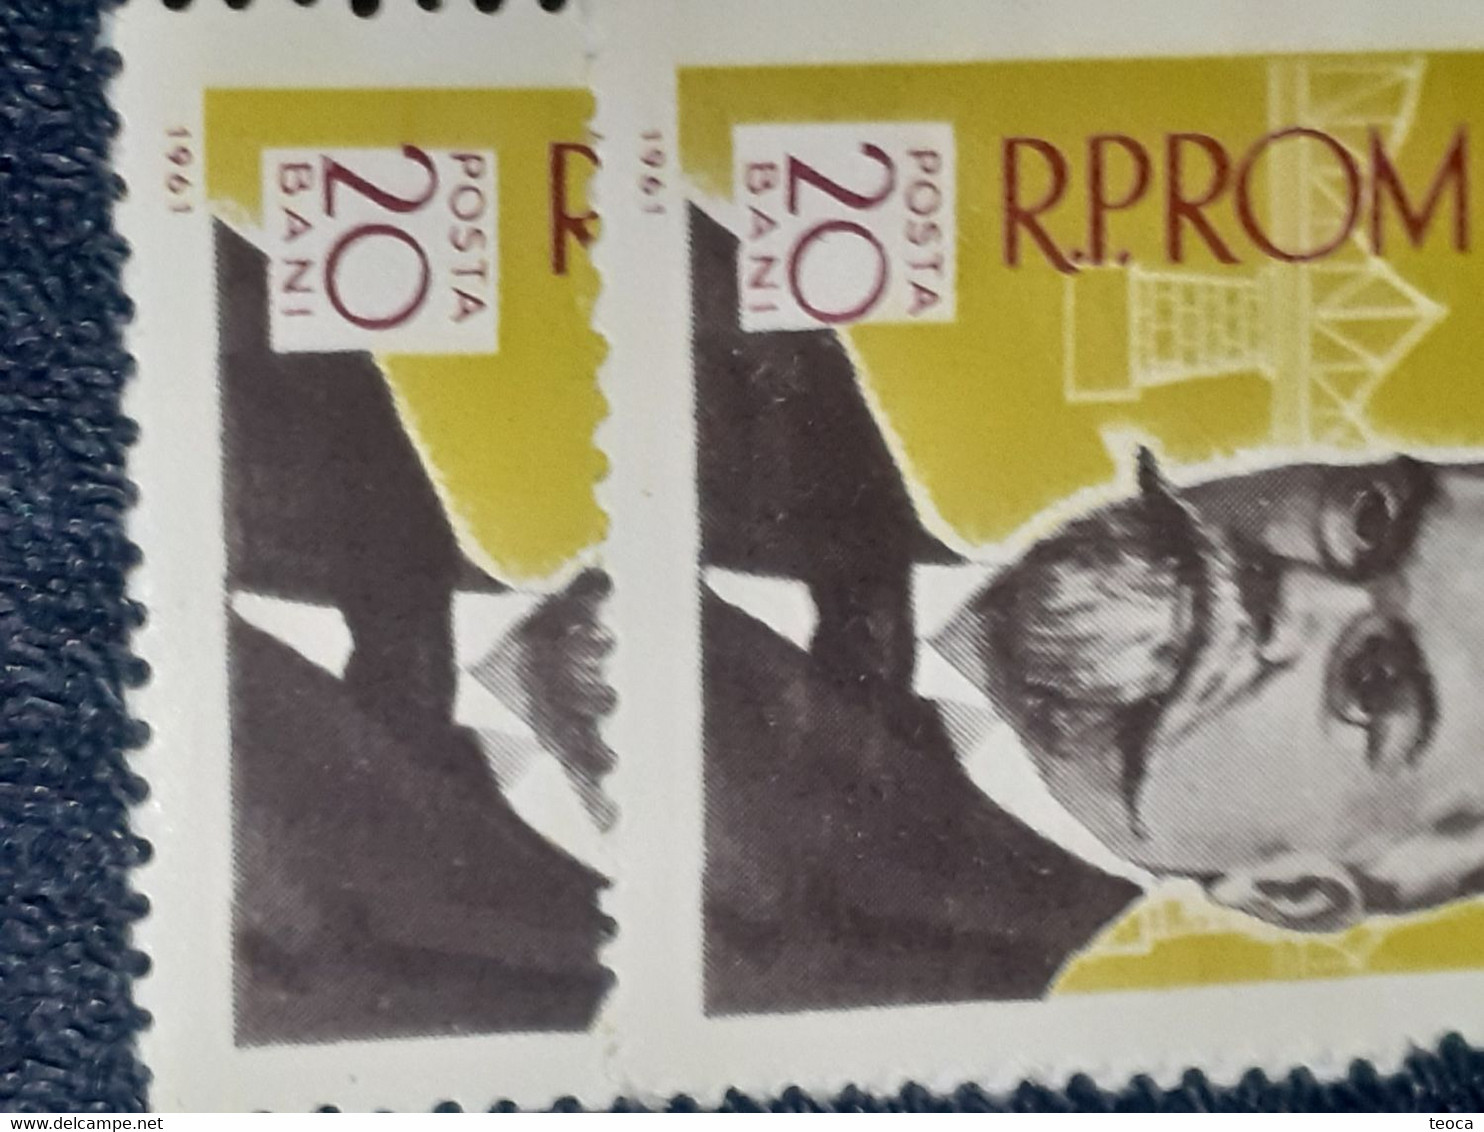 Errors Romania 1961 # Mi 1959 Anghel Saligny, Printed With Numbers And Letter Shifted Left And Right See Image - Abarten Und Kuriositäten